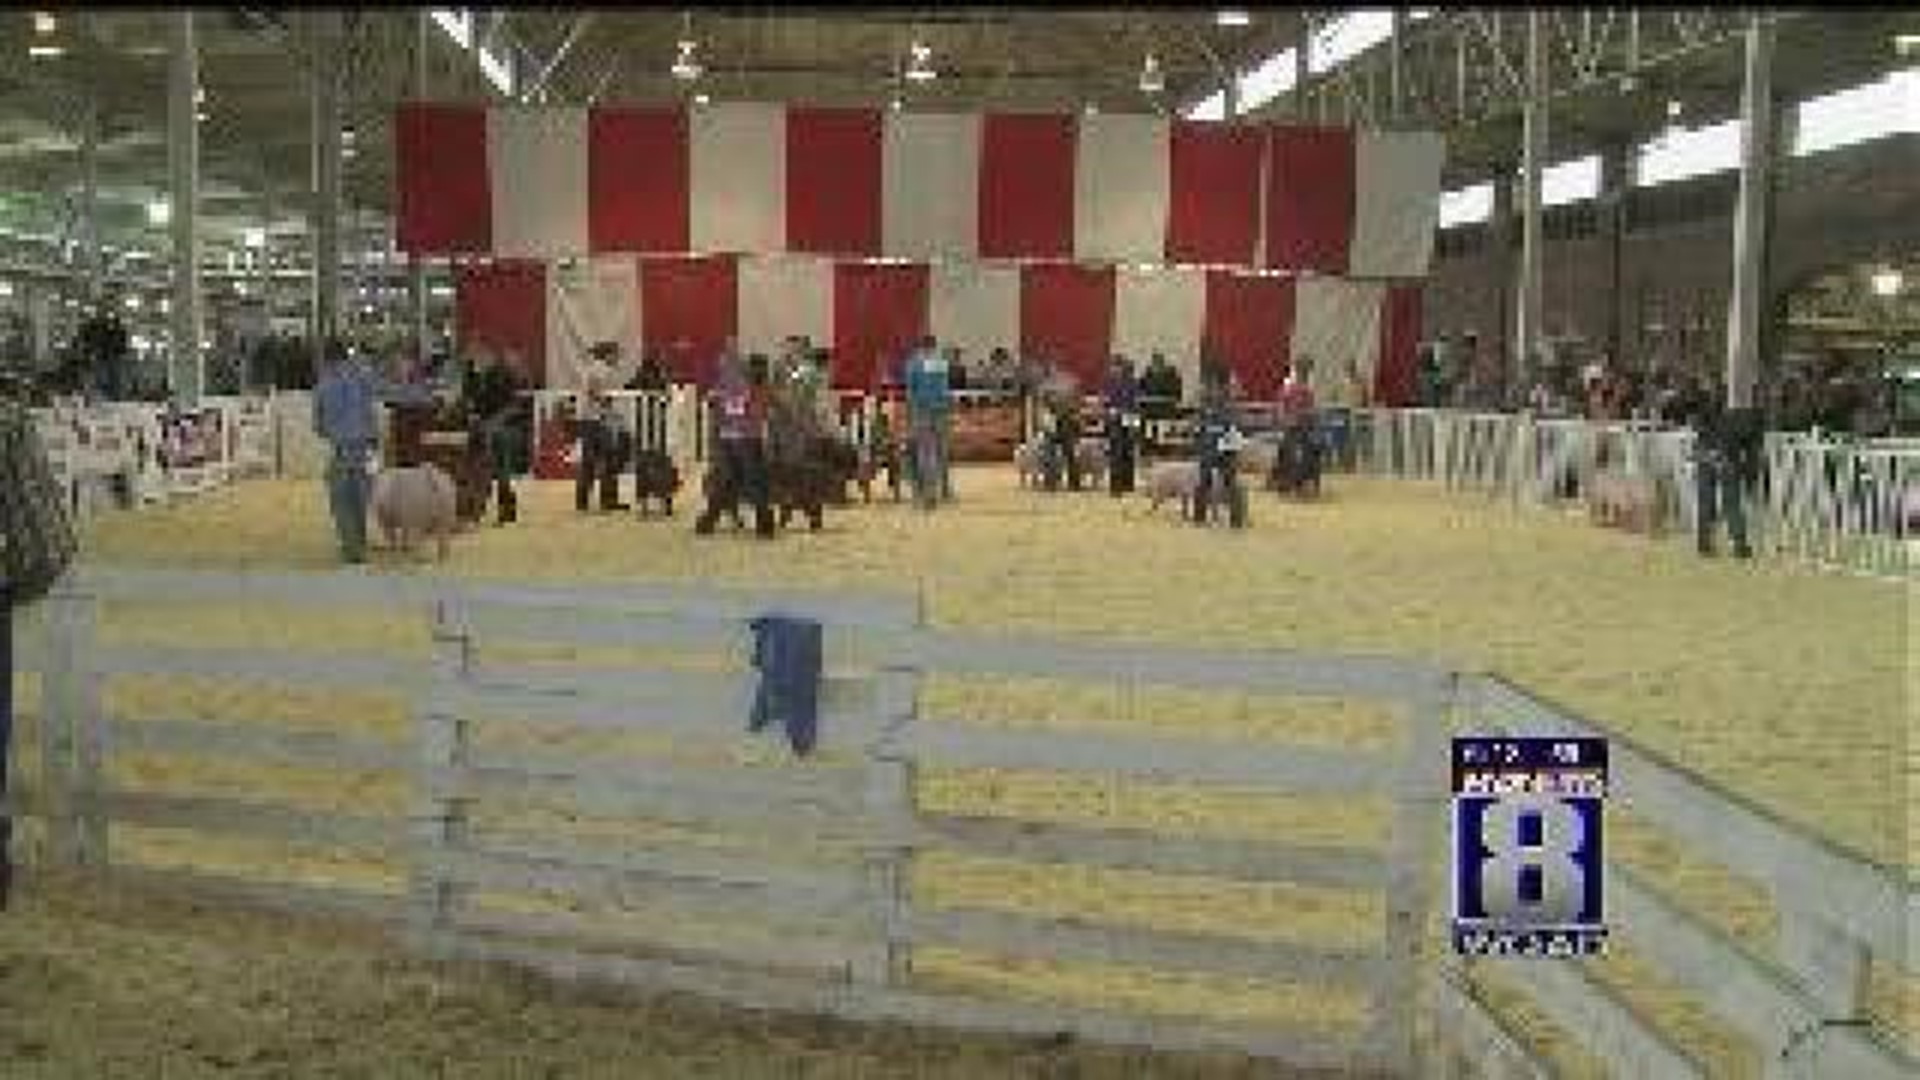 Ag in the AM: Pork Expo Starts